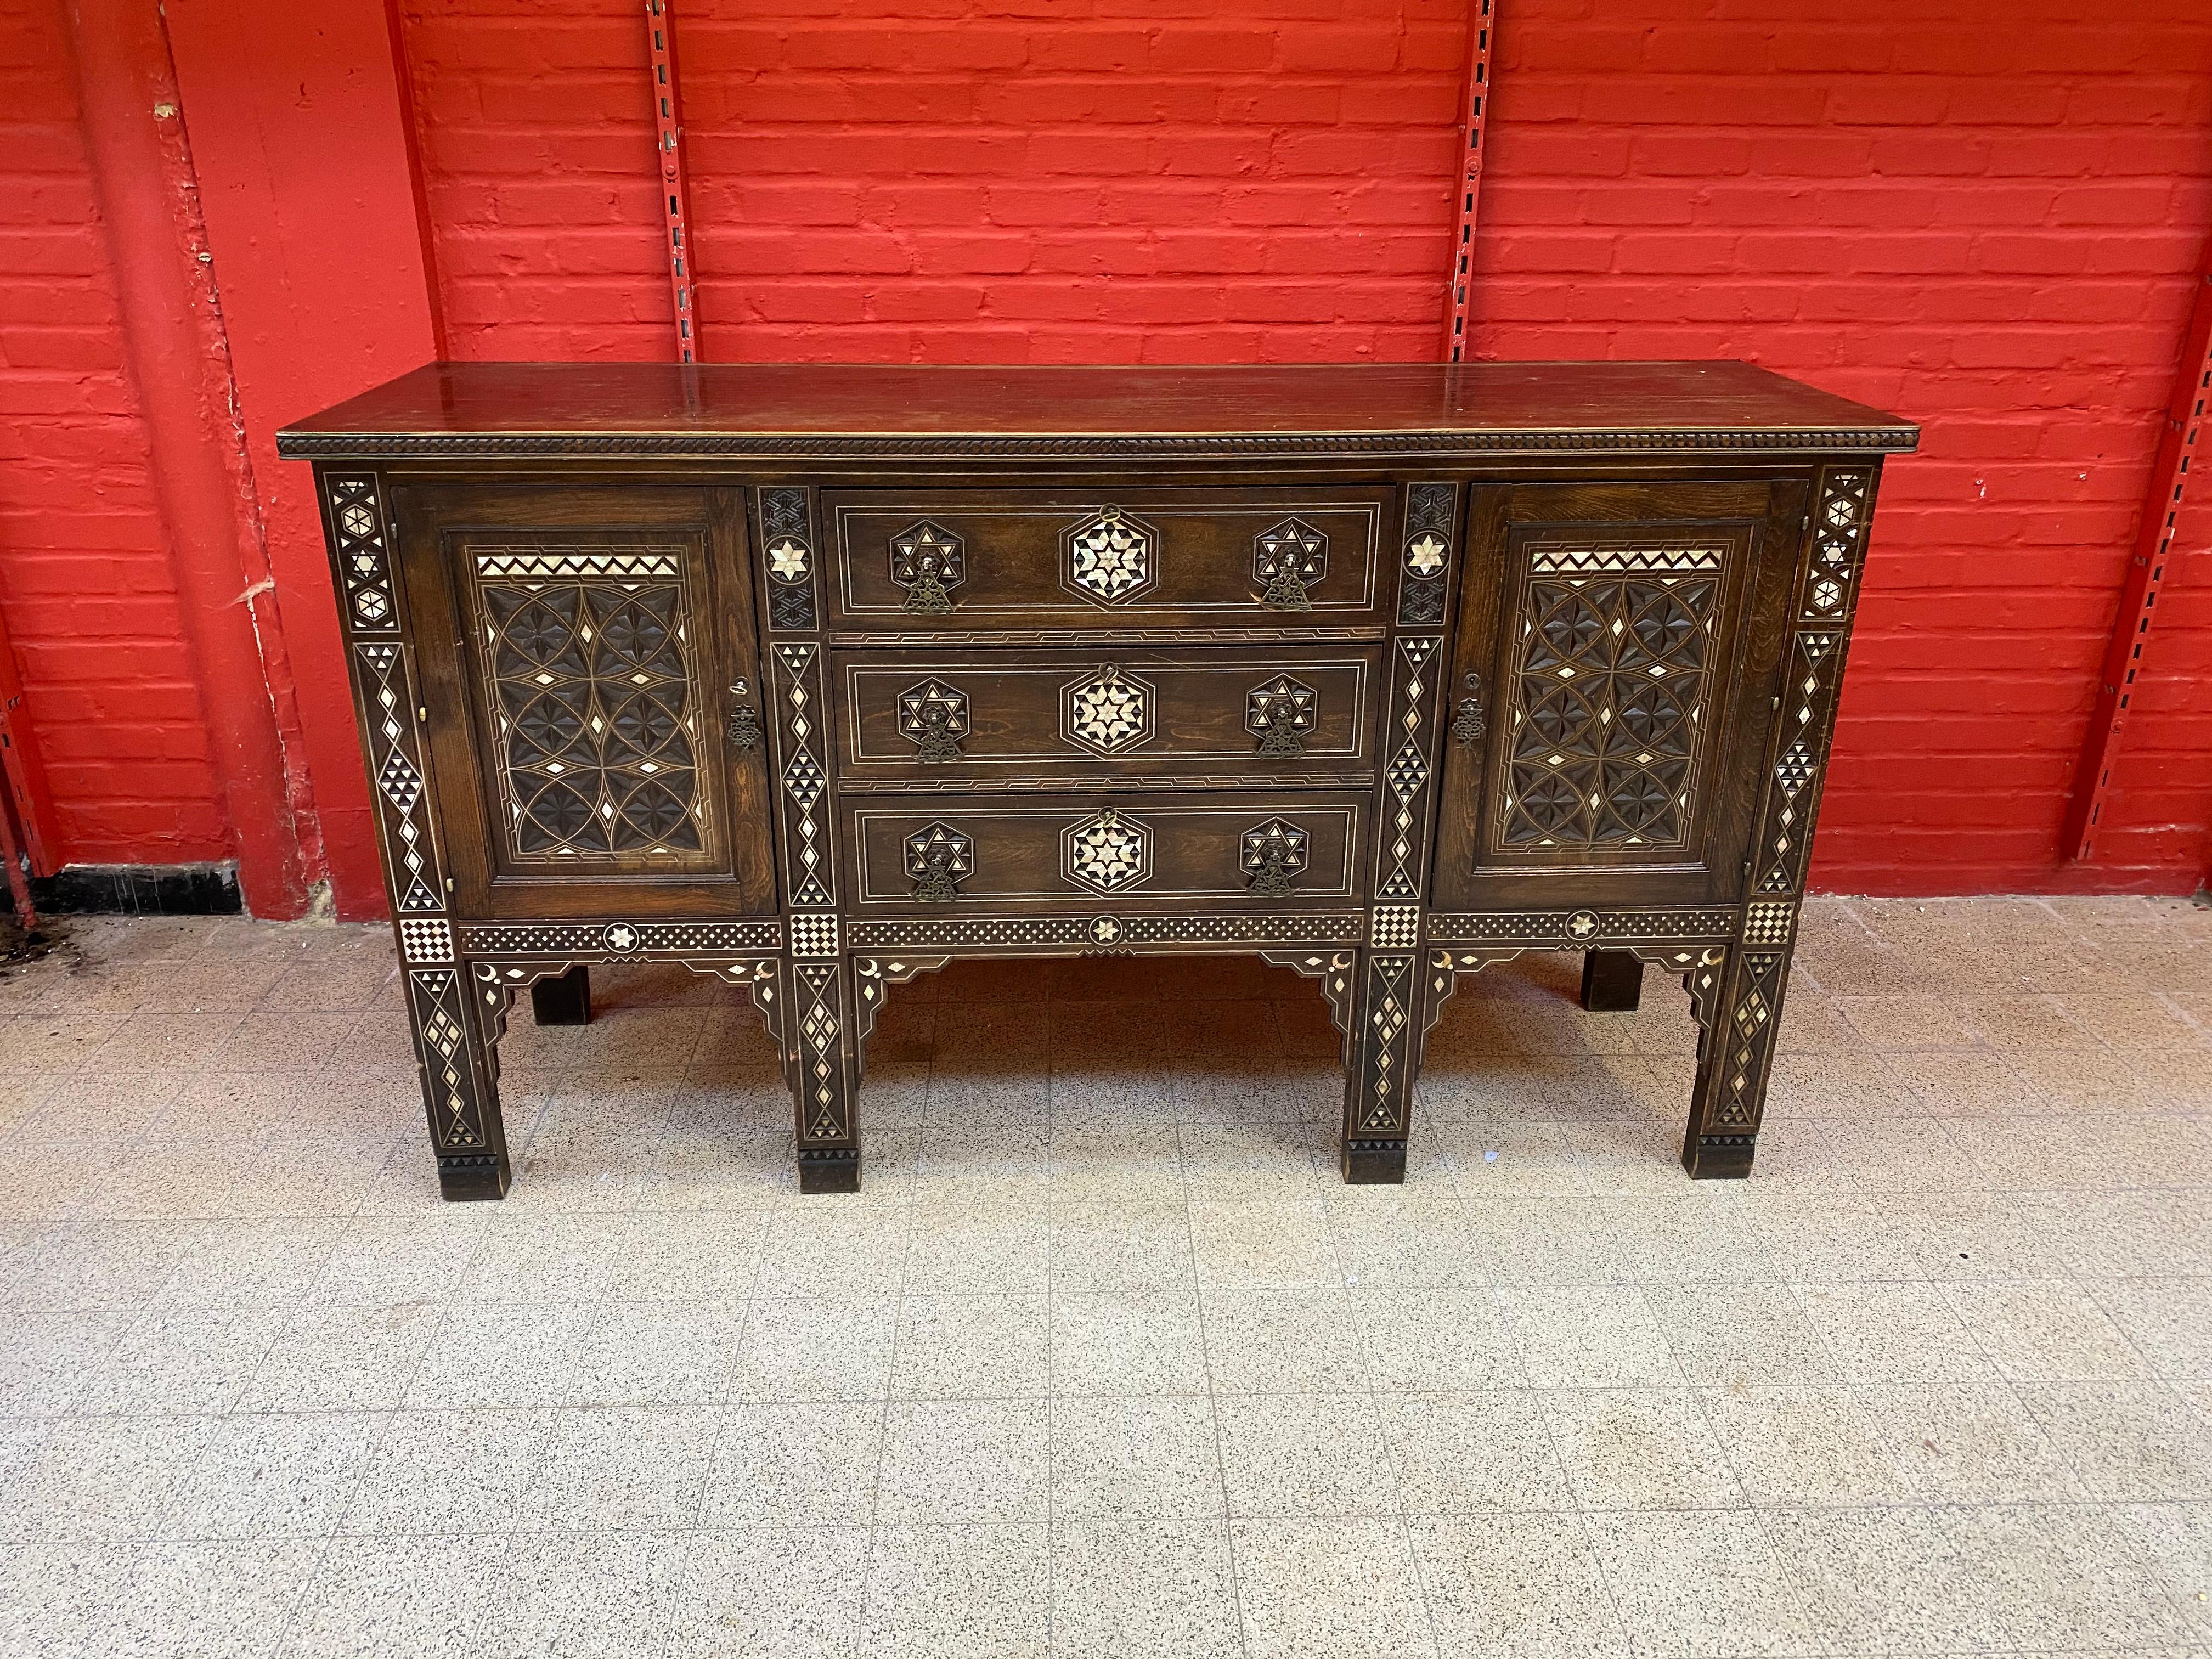 Large oriental-style sideboard in carved wood, with mother-of-pearl inlay; wrought iron handles;
pewter wire inlay 
small losses of mother-of-pearl.
Provenance the Old Palace Saint George in Alger, circa 1880.
is part of a complete dining room.